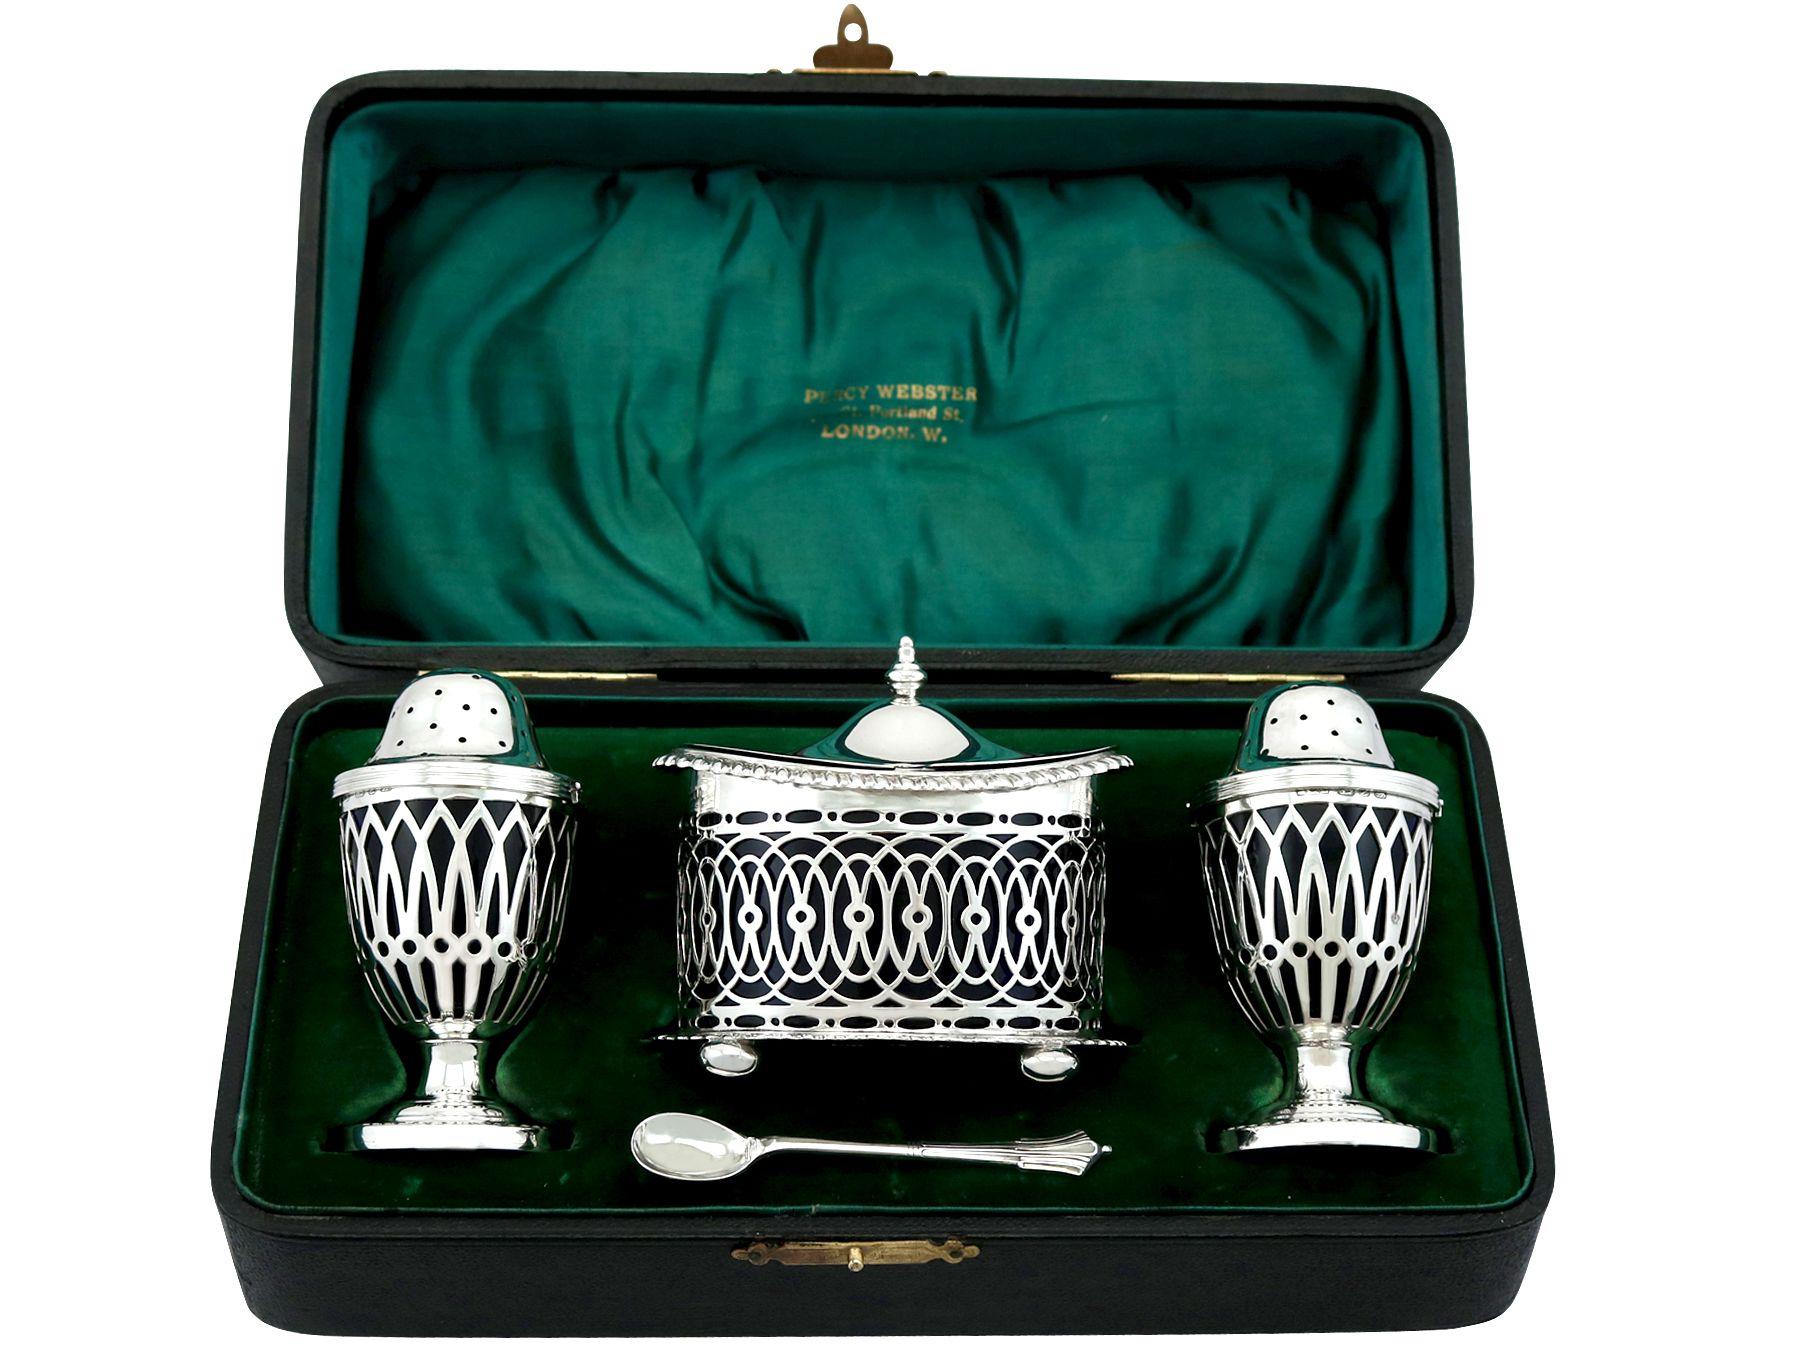 An exceptional, fine and impressive antique Victorian English sterling silver three piece condiment/cruet set - boxed; an addition to our dining silverware collection.

This exceptional antique Victorian English sterling silver condiment set